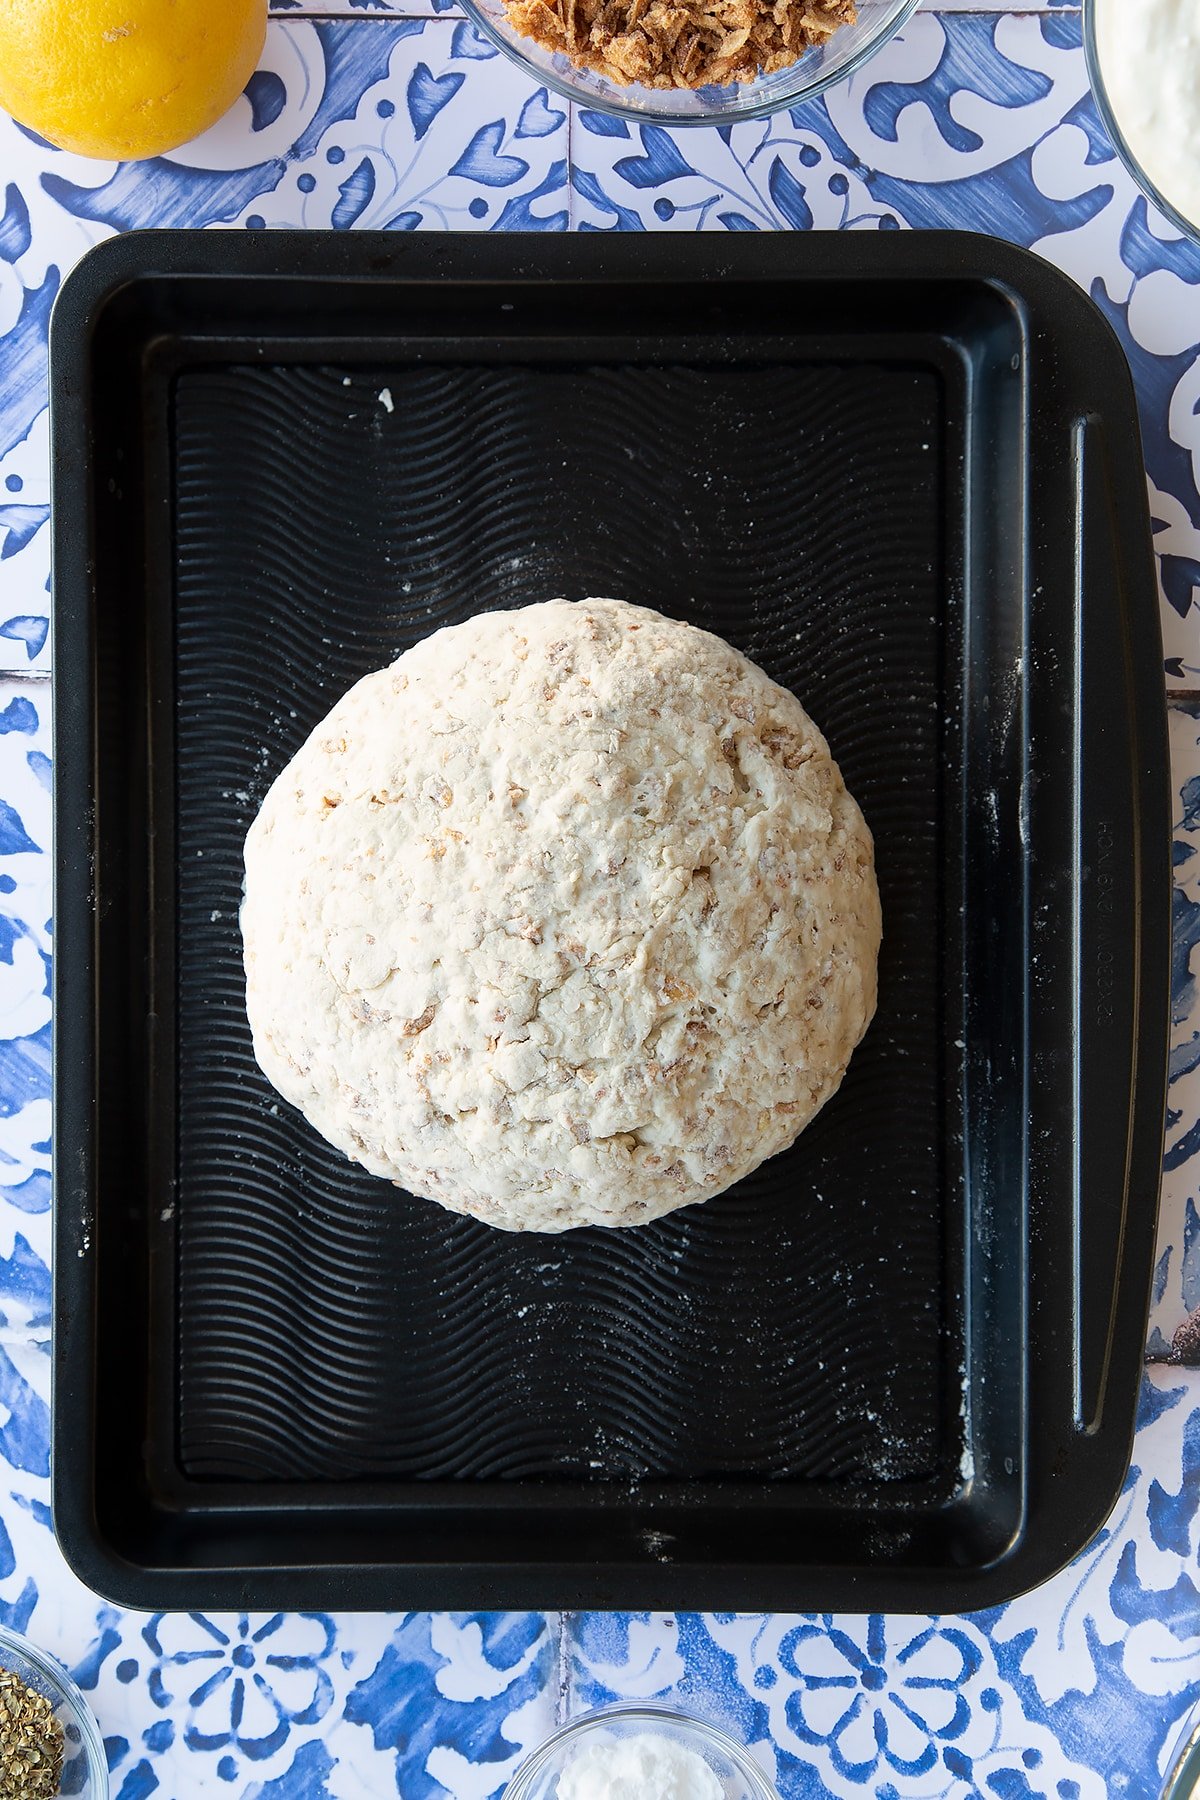 A ball of onion soda bread dough on a baking tray. Ingredients to make onion soda bread surround the tray.